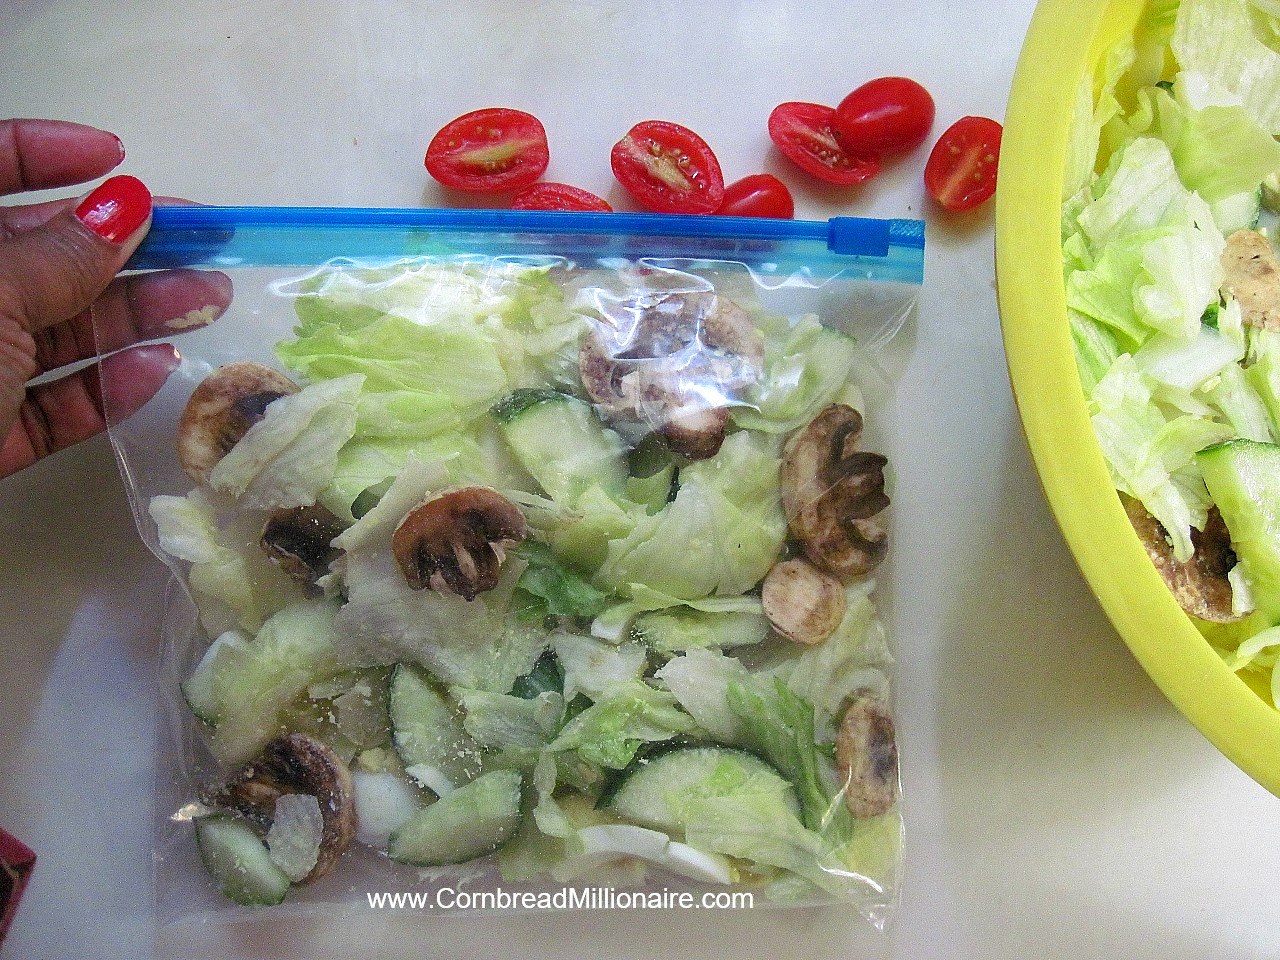 Homemade Salad Mix In A Bag UPDATED